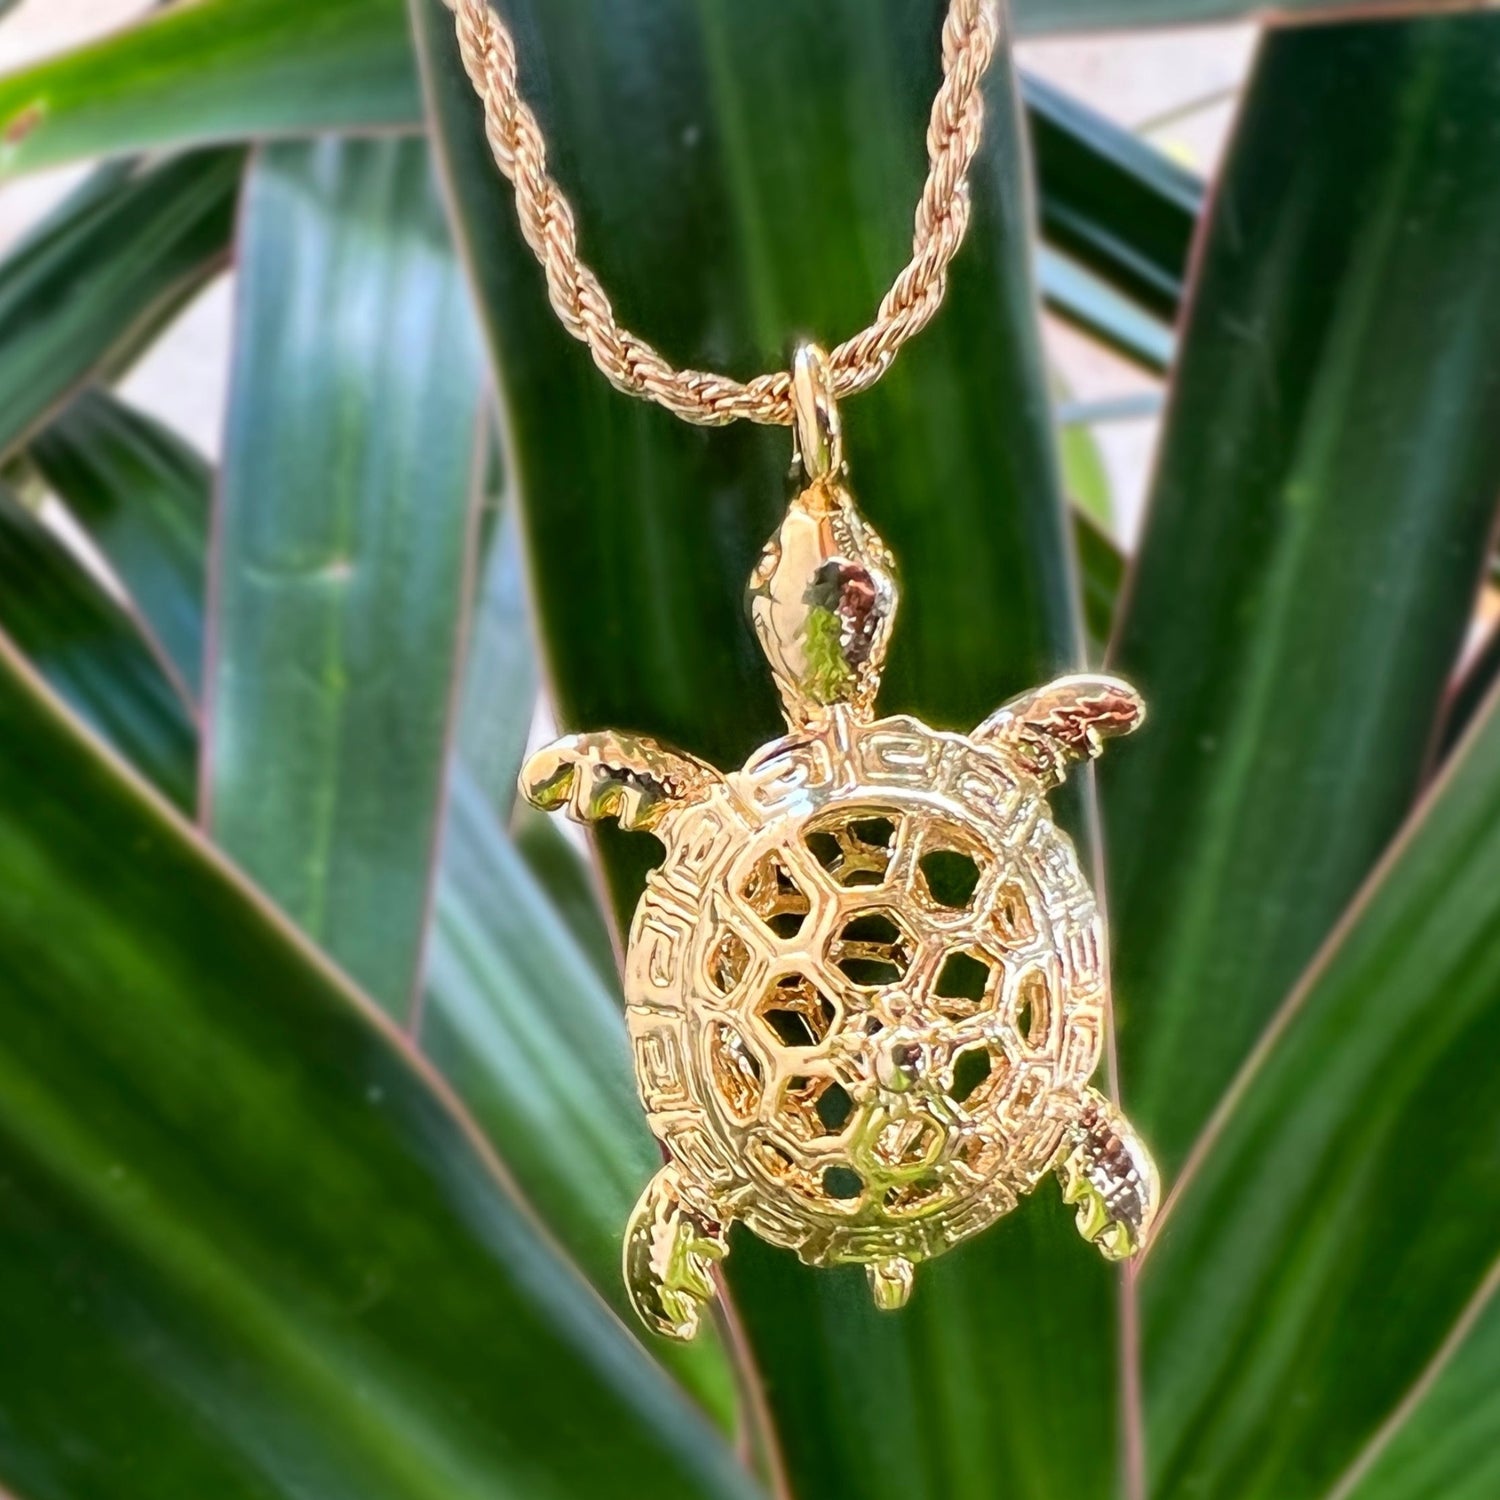 Turtle Single-Pearl Cage Pendant (Sterling silver)